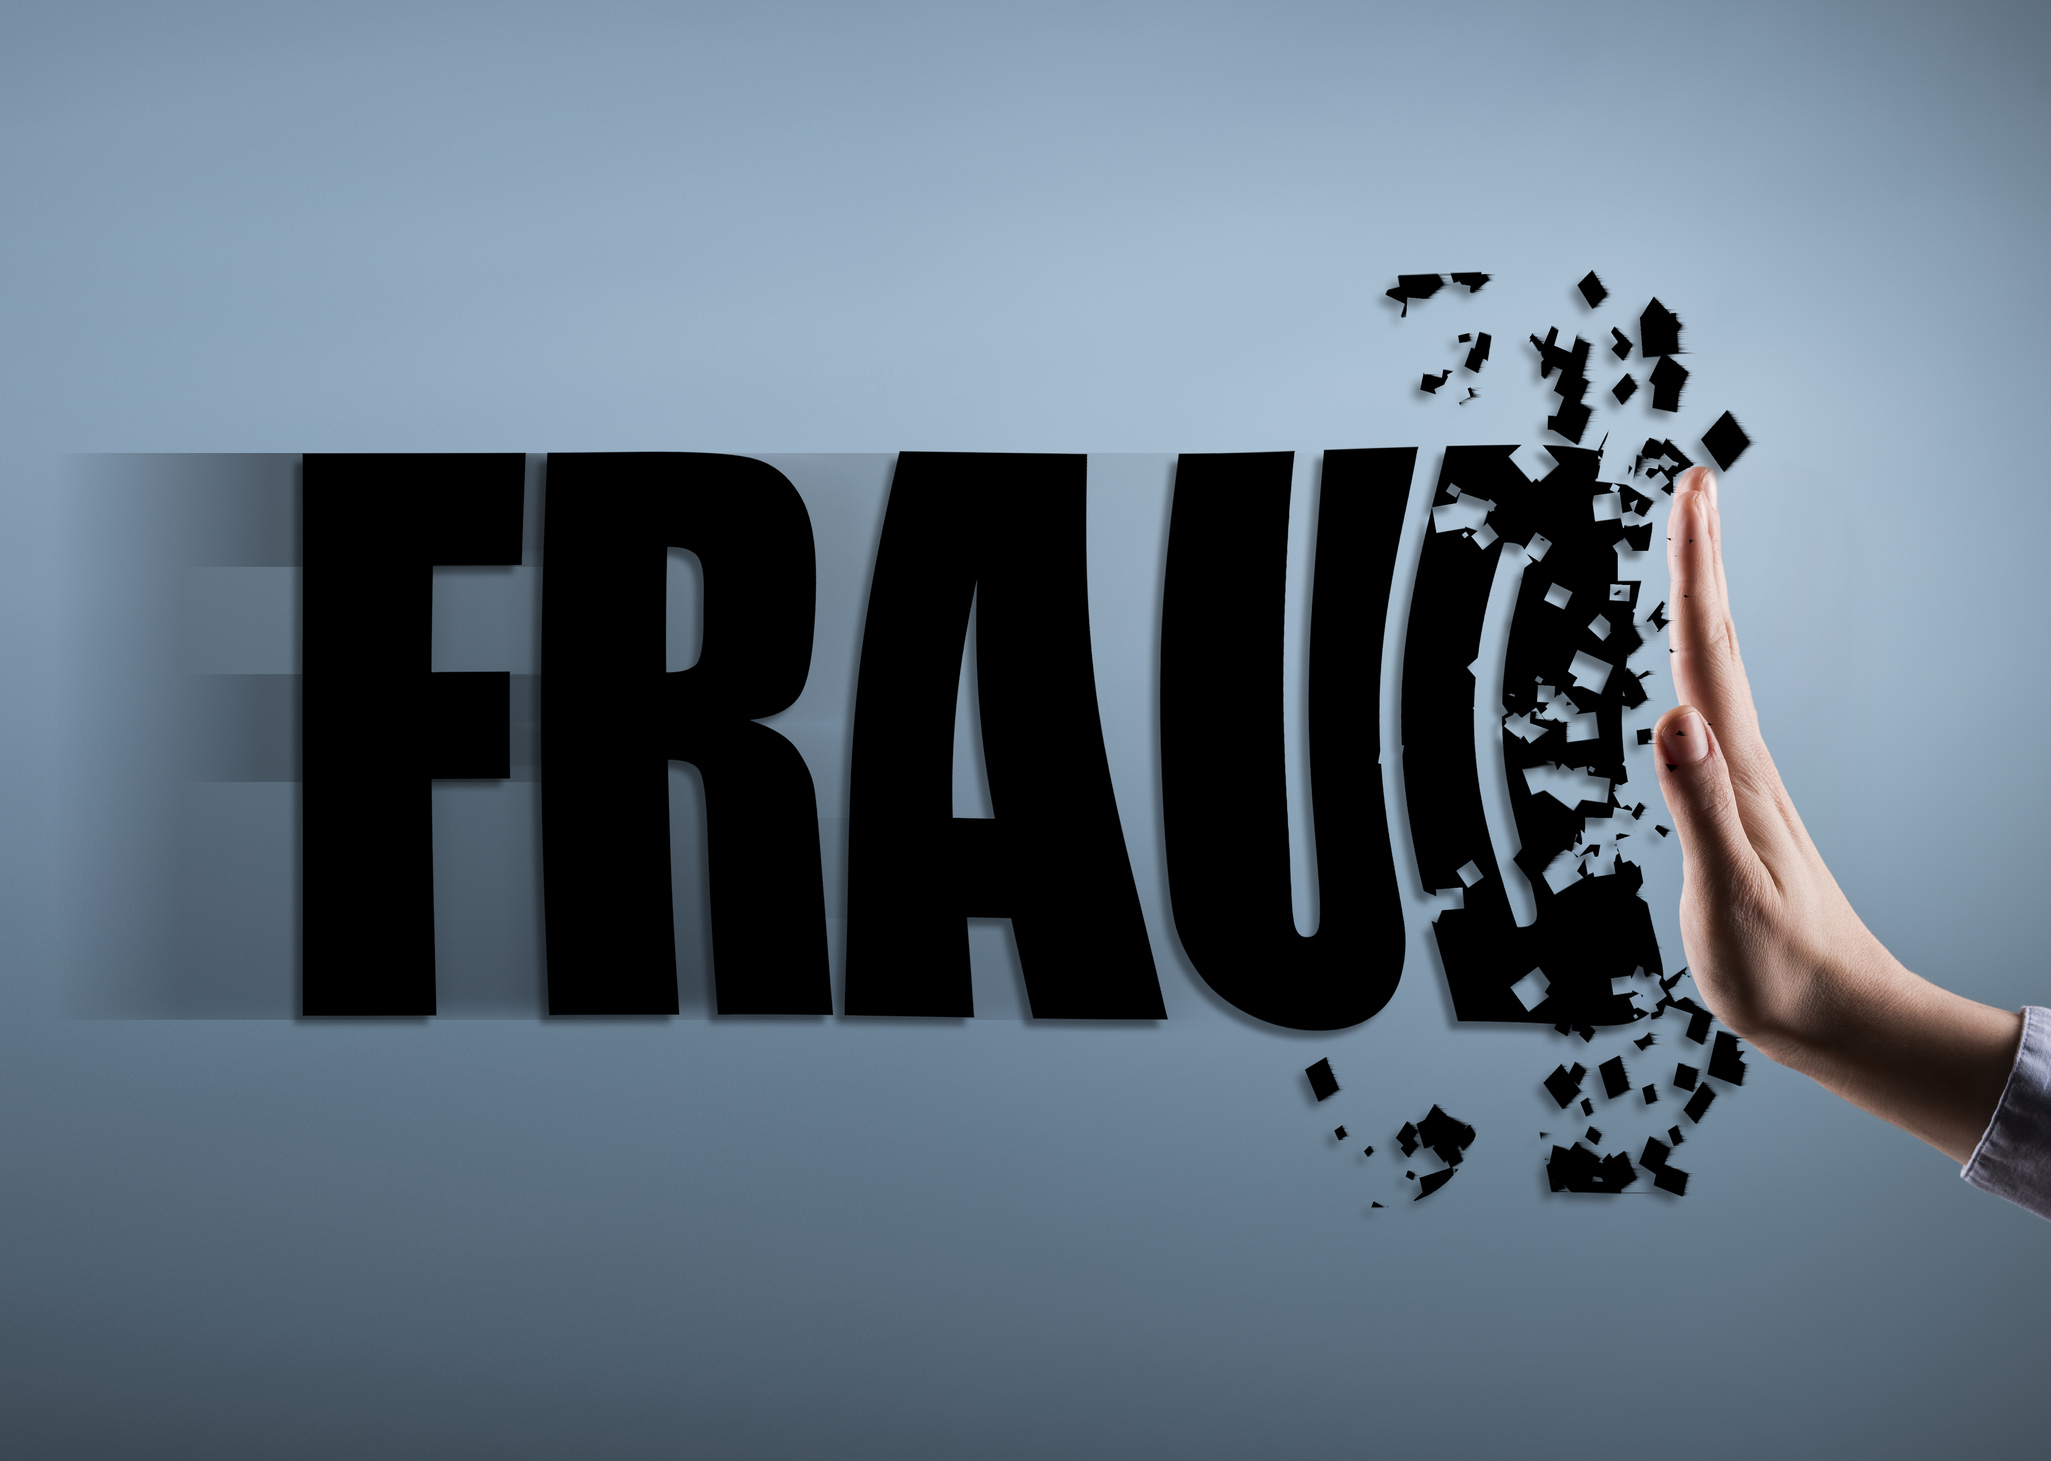 a hand stops and disintegrates the word "fraud" against a blue background